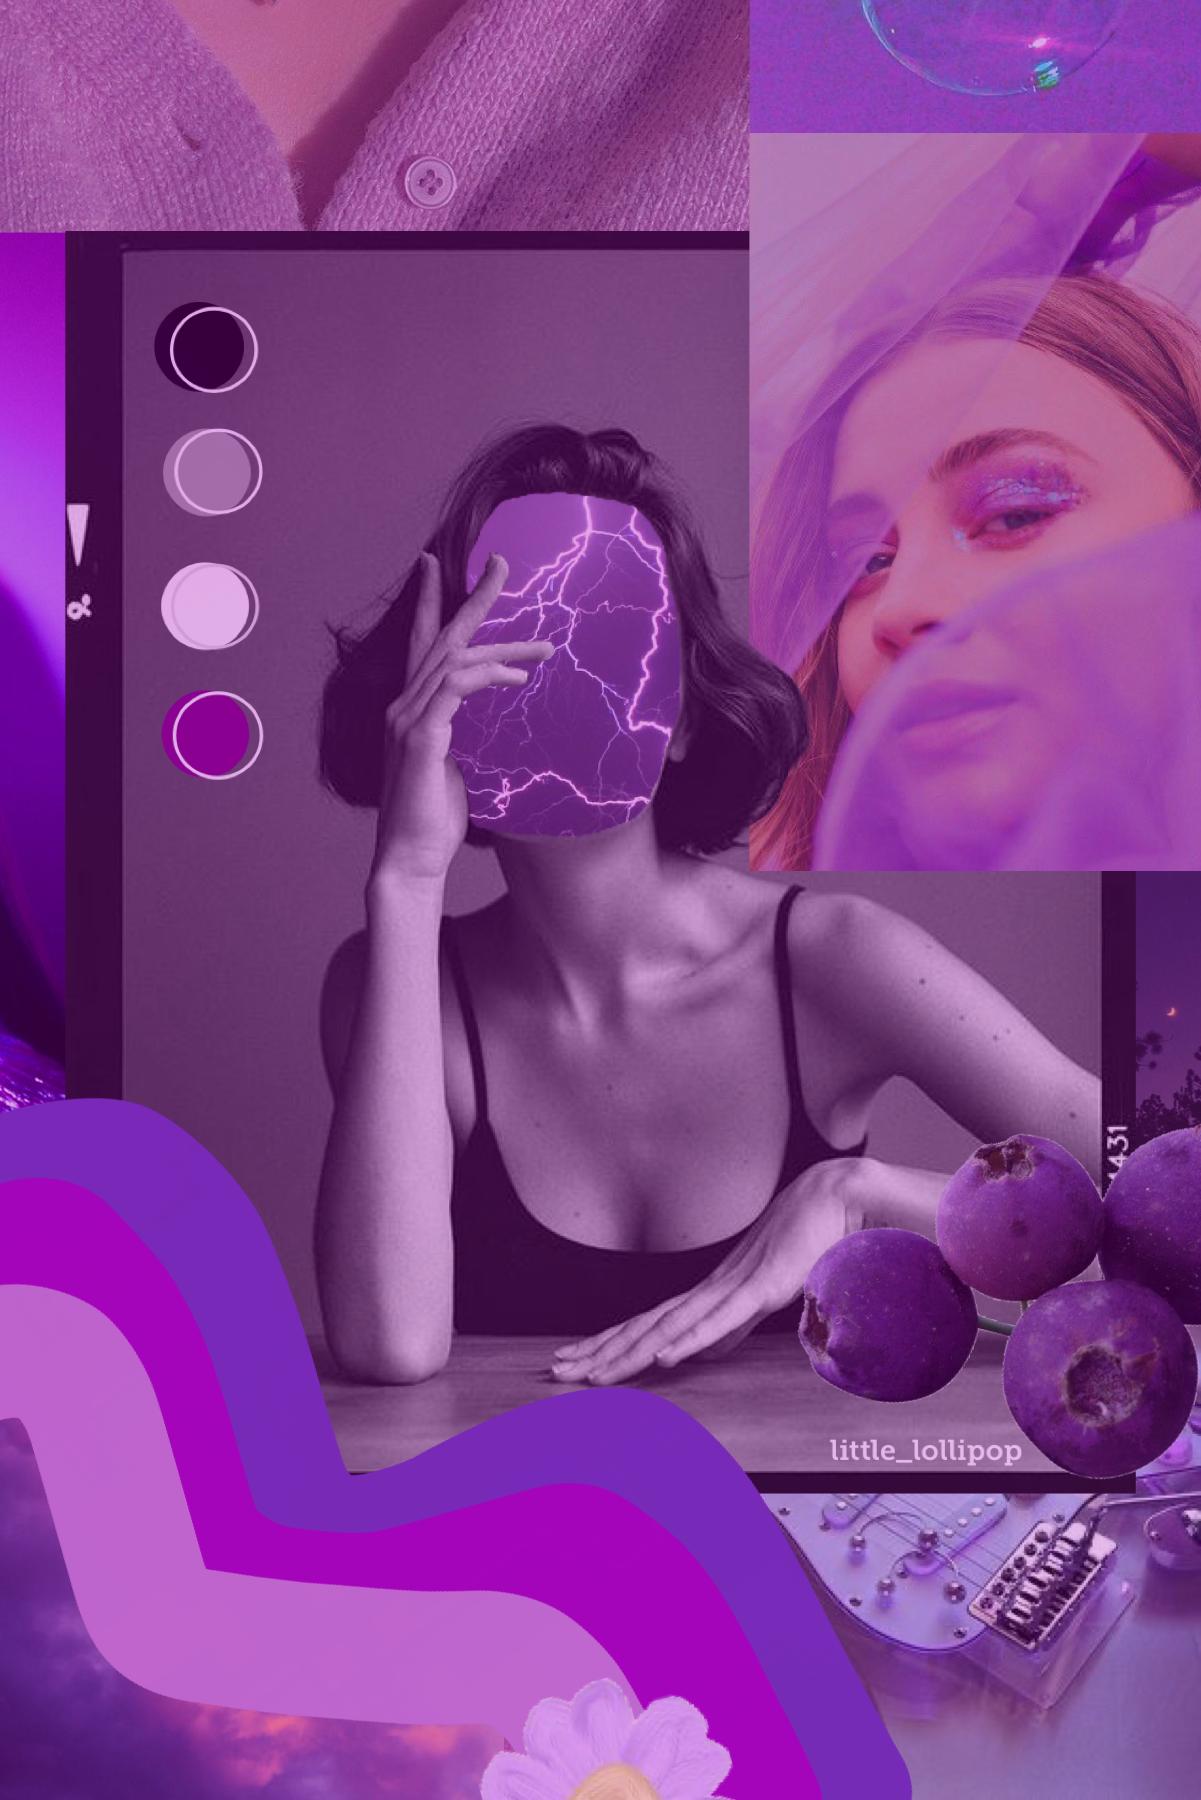 hi its been a while, but here’s the purple collage!💜